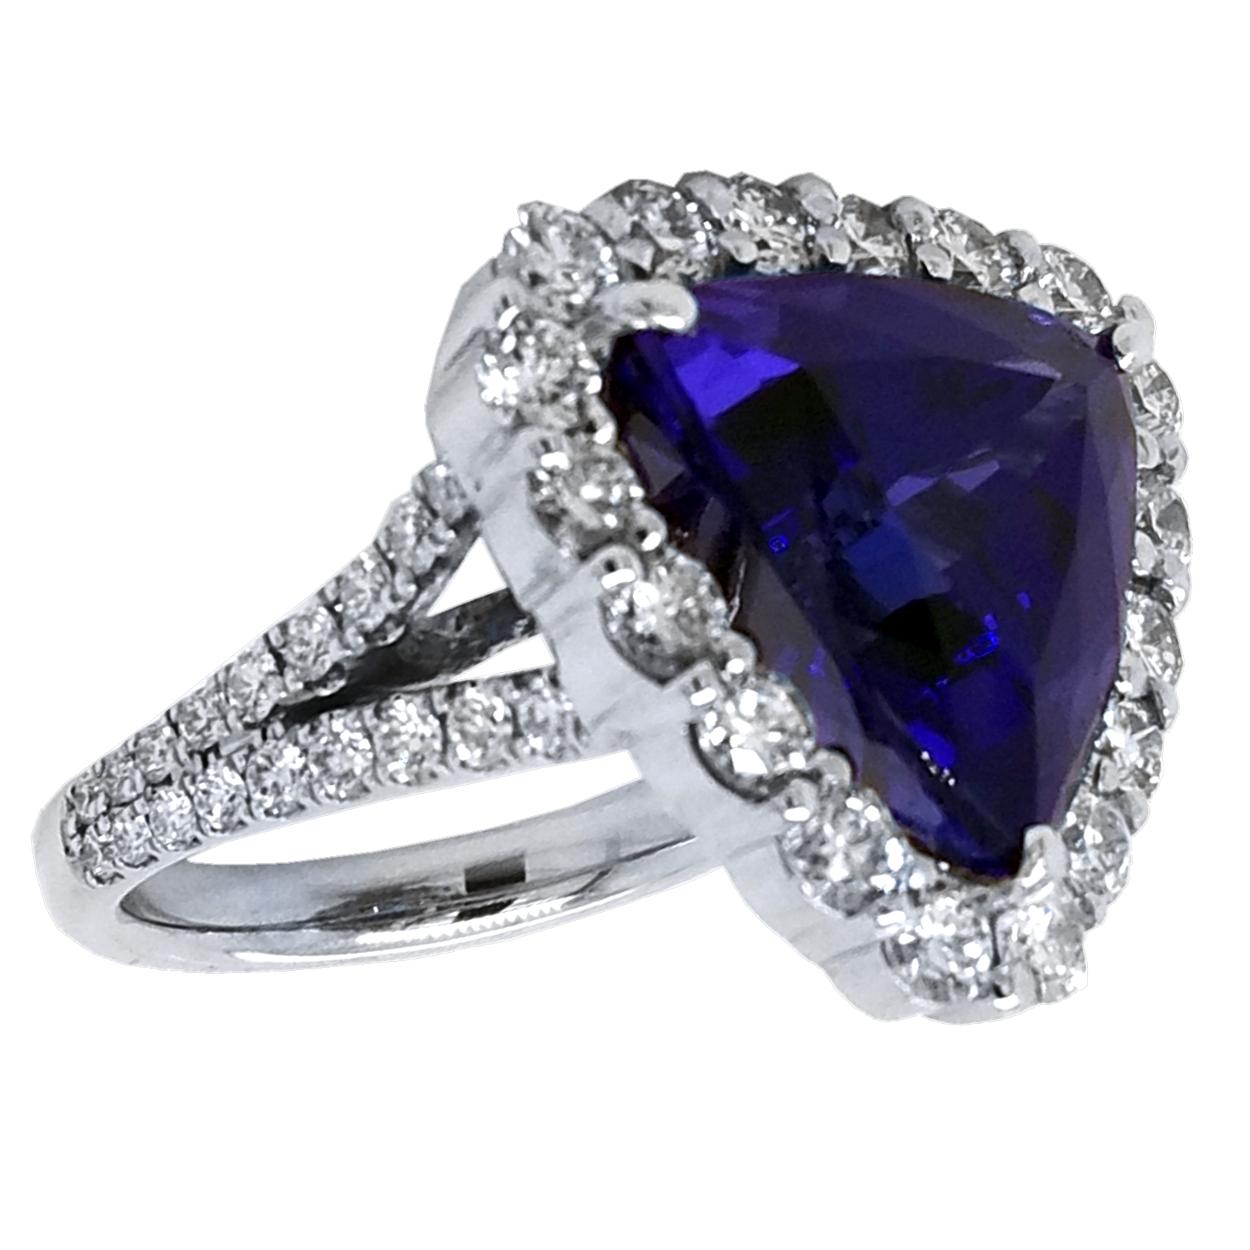 A beautiful color GIA Certified 12.40 Ct Trillion shaped tanzanite set in the center of an 18K split shank pave set diamond engagement ring with a halo to create great contrast. 

Details:
Center Stone: 12.40 carat Trillion tanzanite
Side Stone